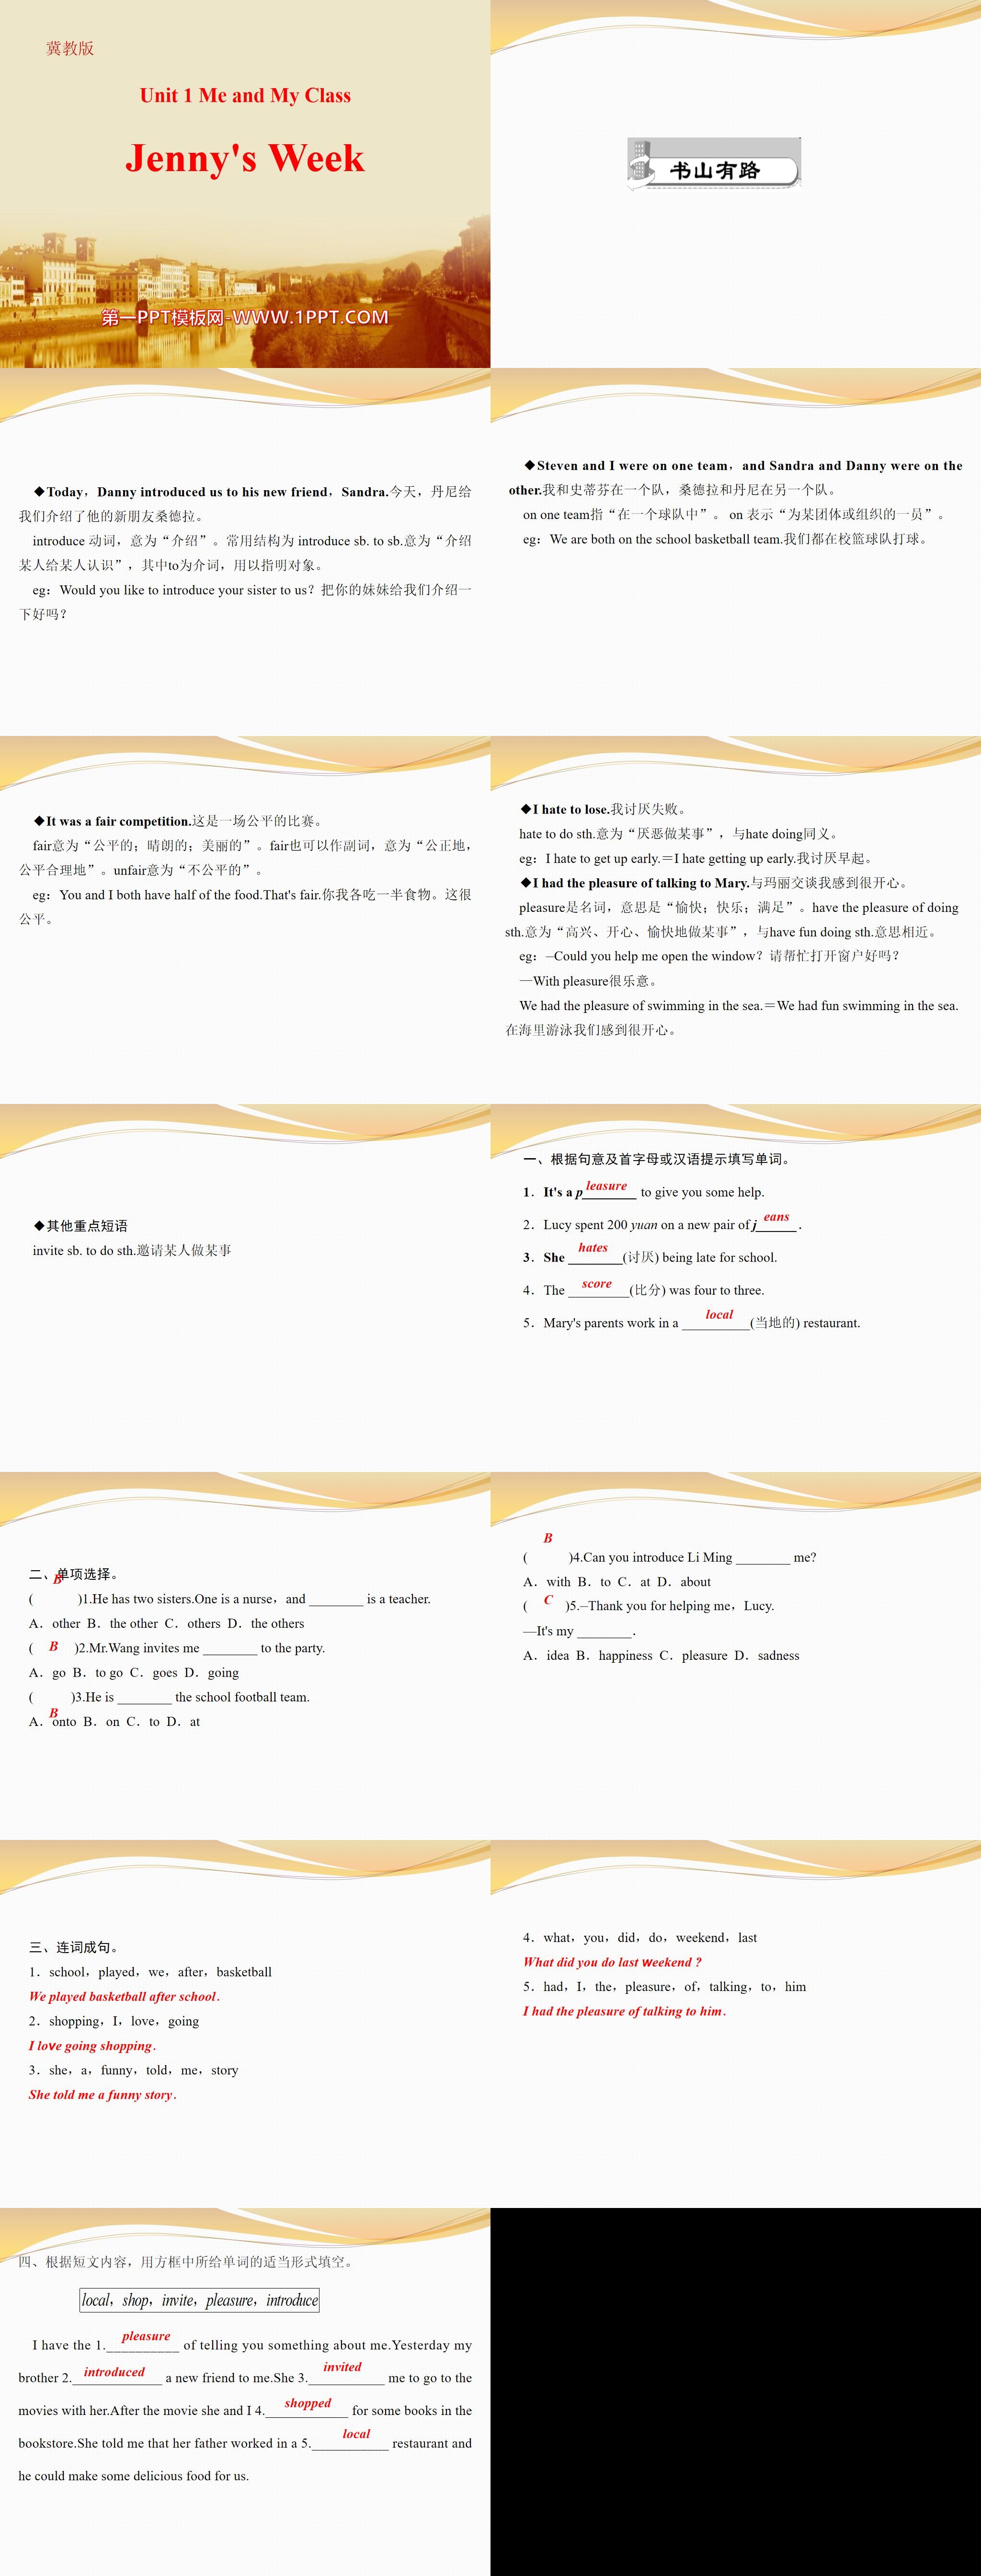 《Jenny's Week》Me and My Class PPT课件
（2）